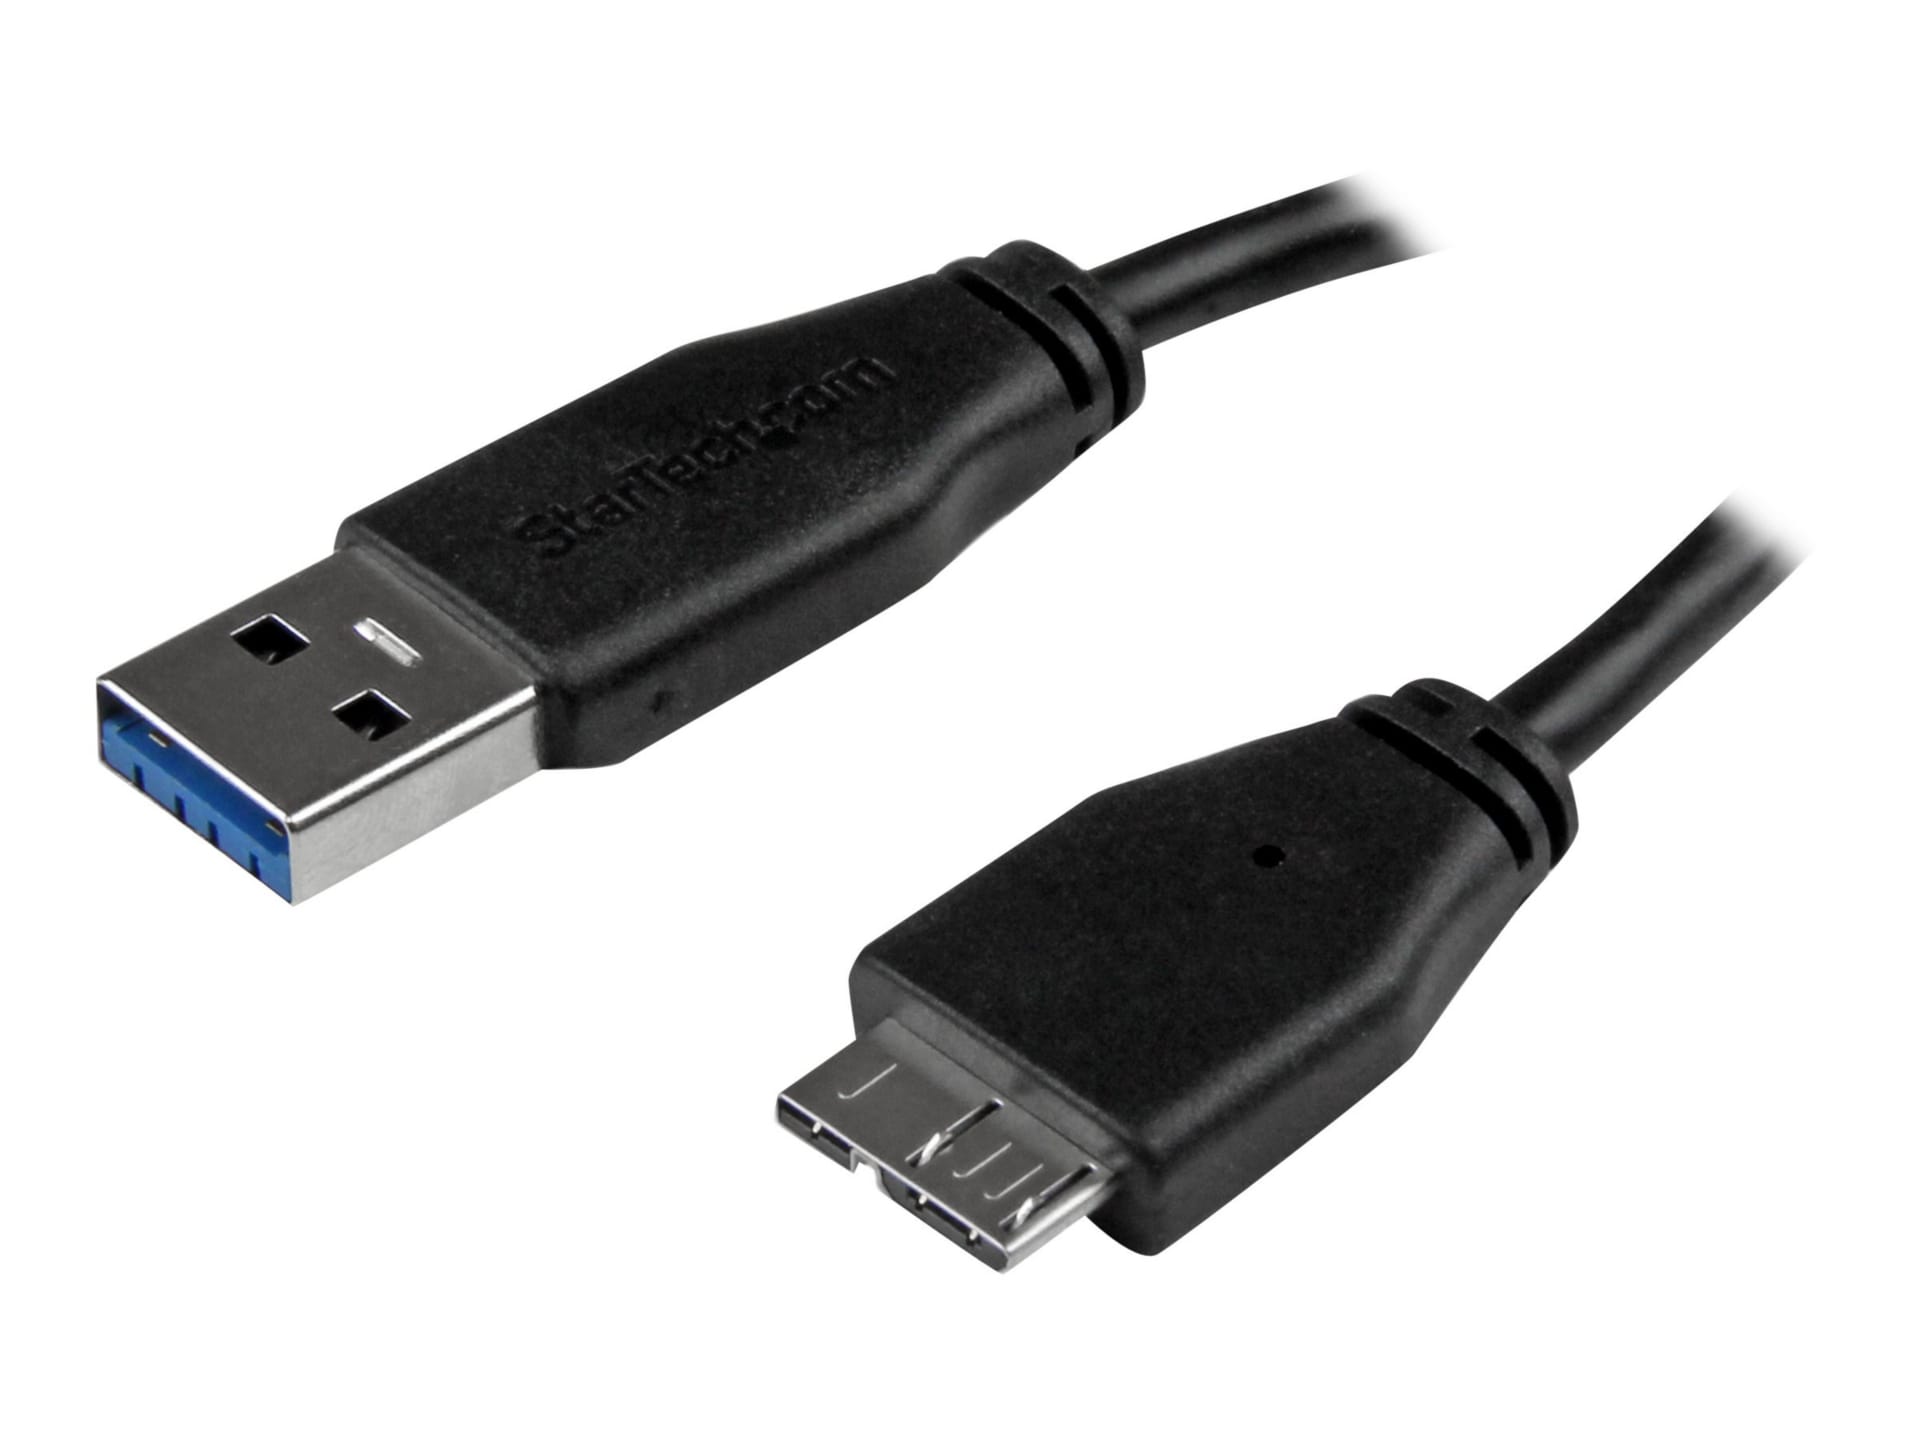 Cable USB 2.0 A/M a Micro USB Tipo B 0.5 Metros